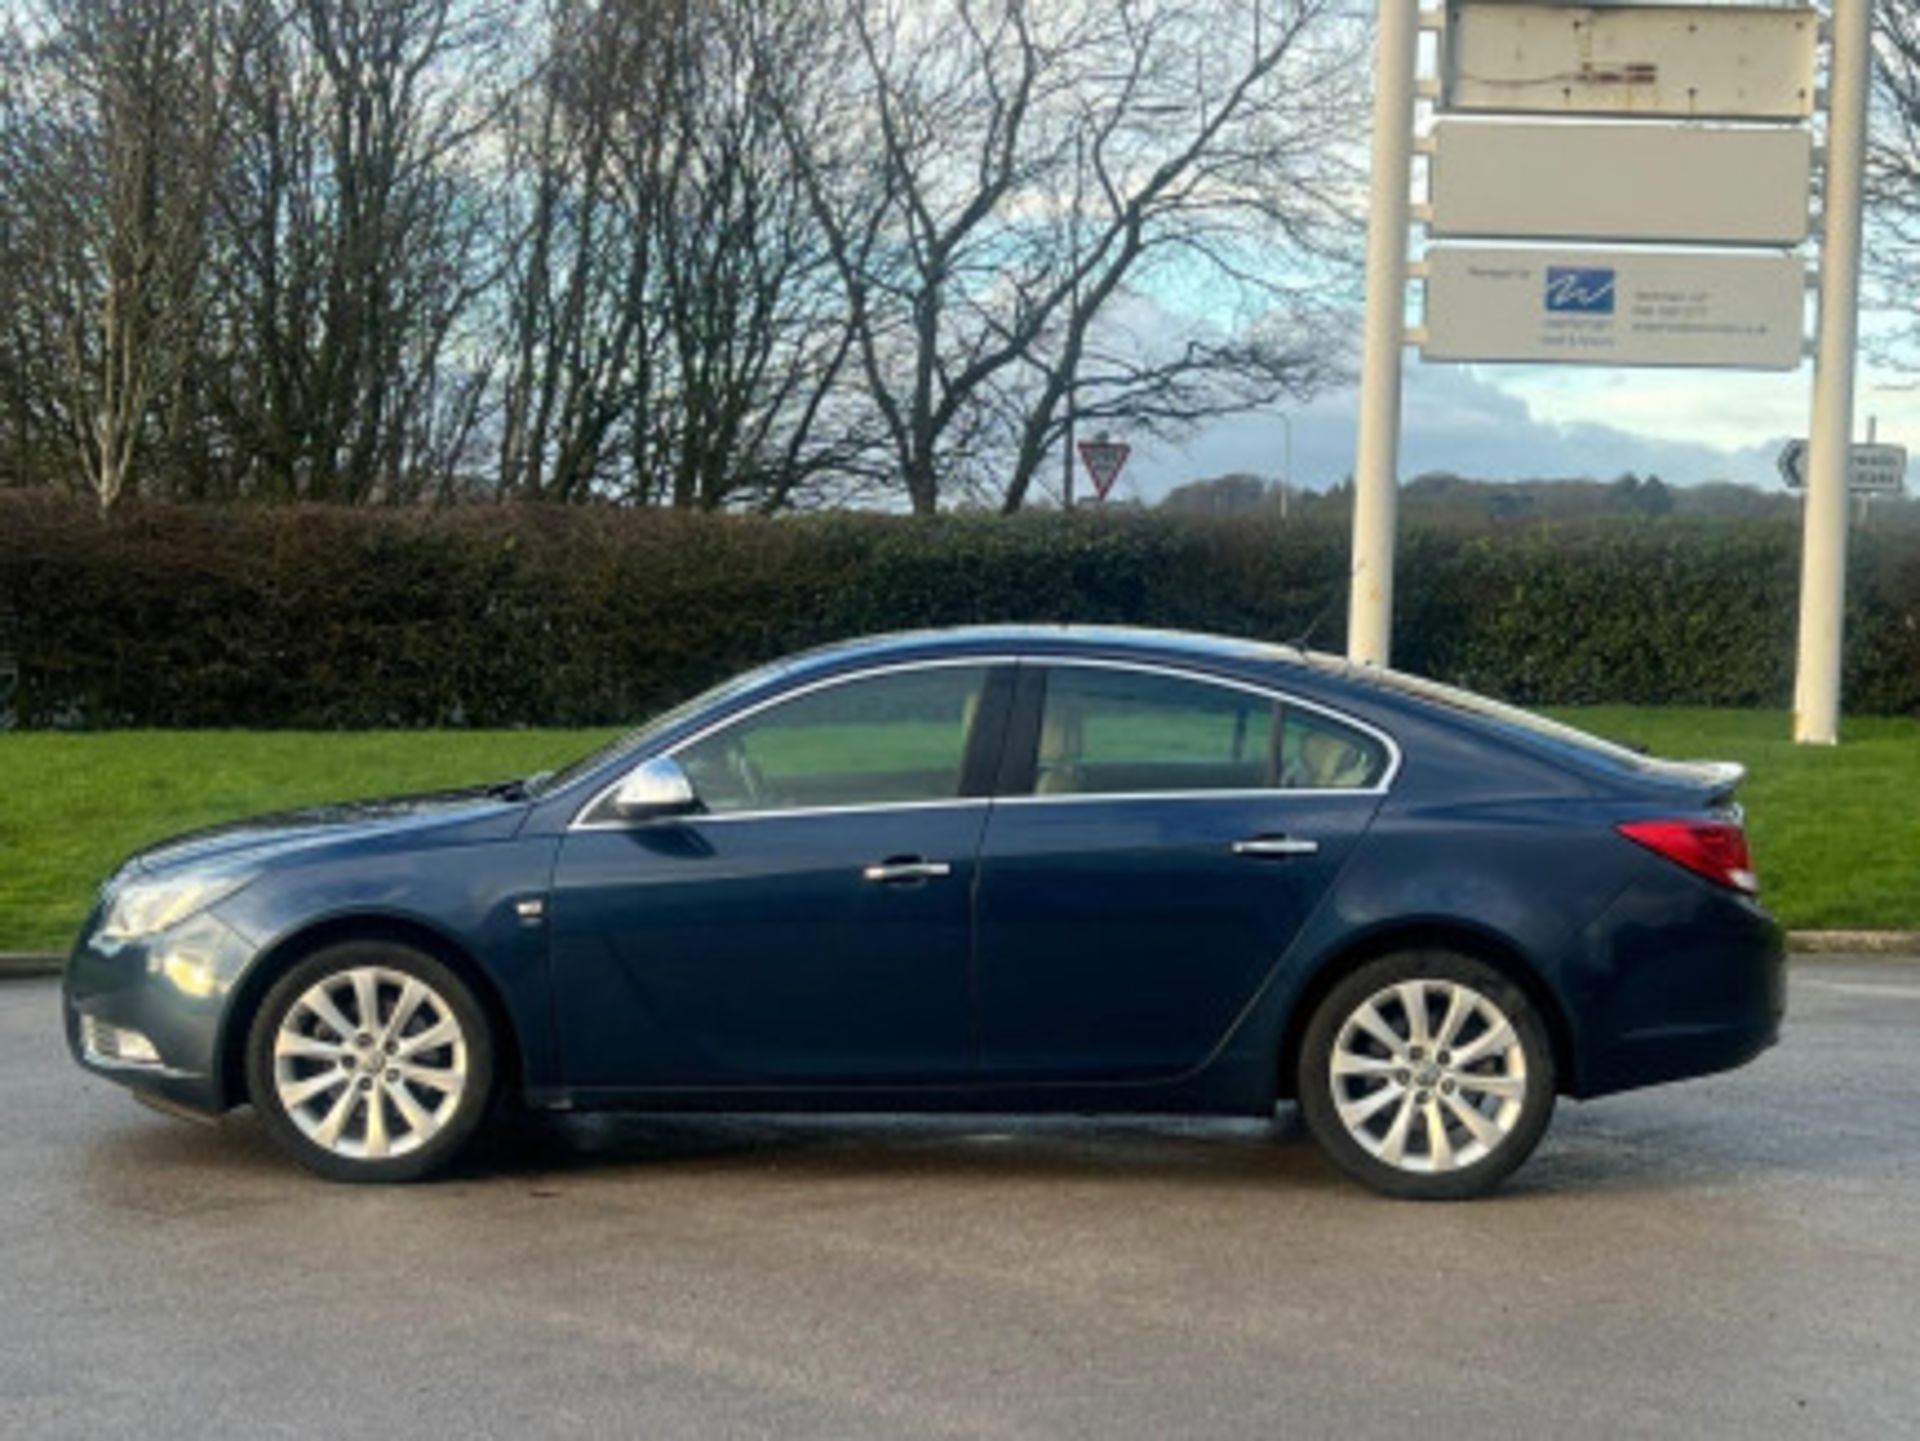 2012 VAUXHALL INSIGNIA 2.0 CDTI ELITE AUTO EURO 5 - DISCOVER EXCELLENCE >>--NO VAT ON HAMMER--<< - Image 51 of 120